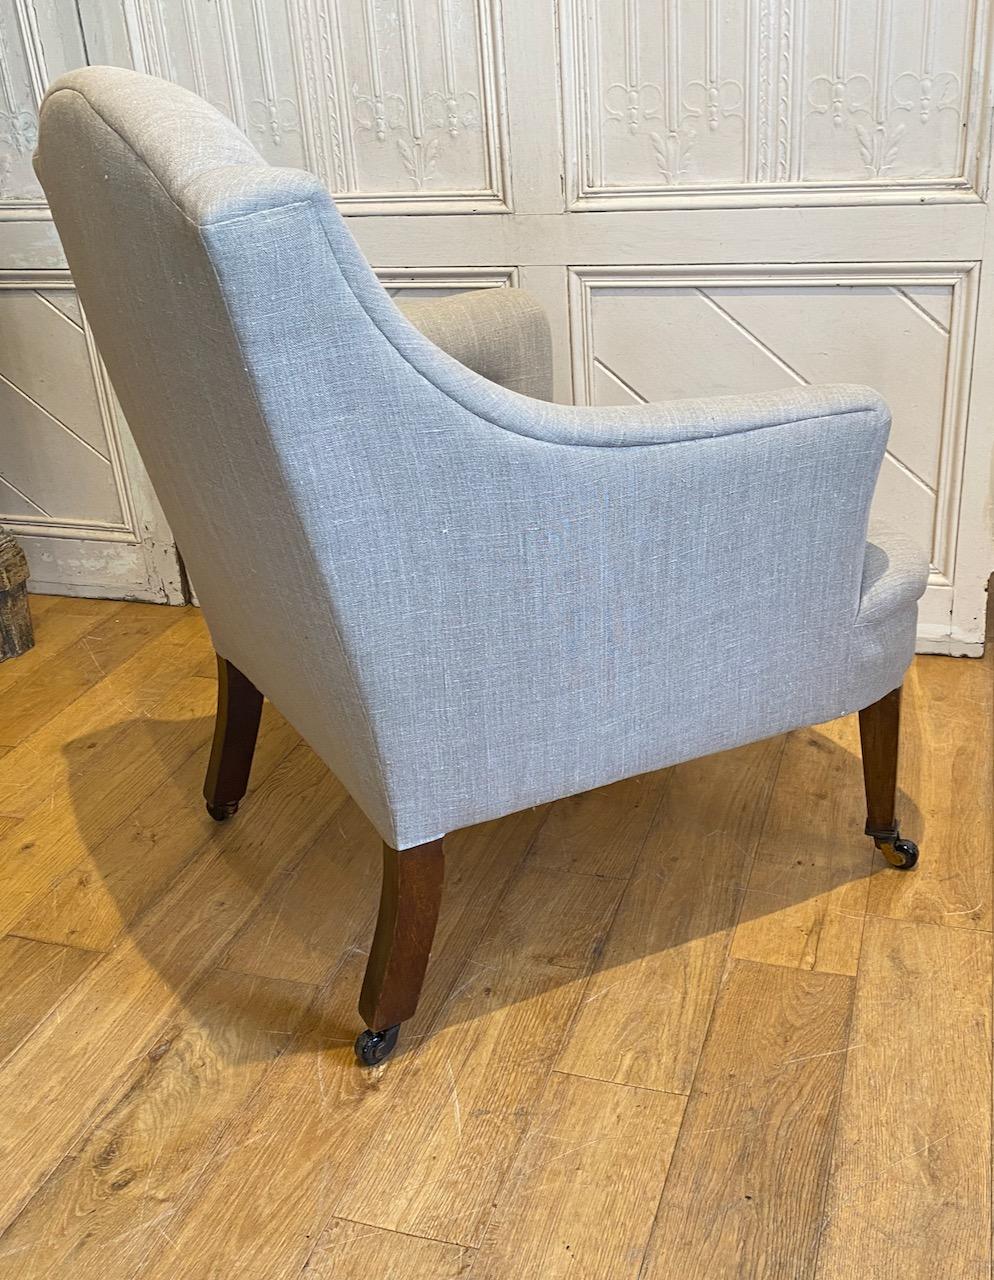 Edwardian Upholstered Arm Chair